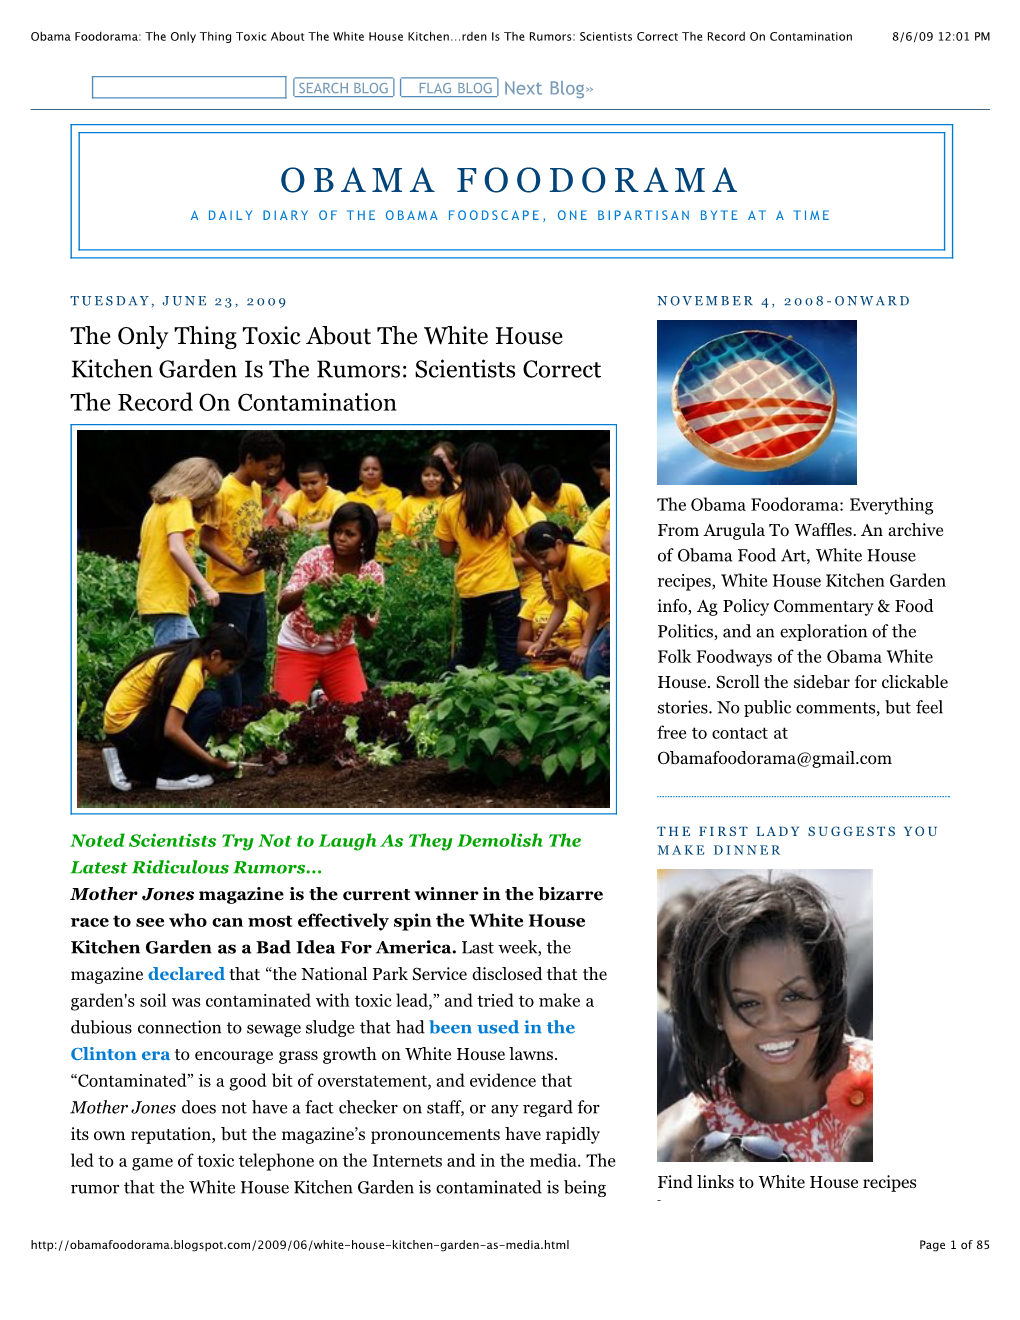 Obama Foodorama the Only Thing Toxic About the White House